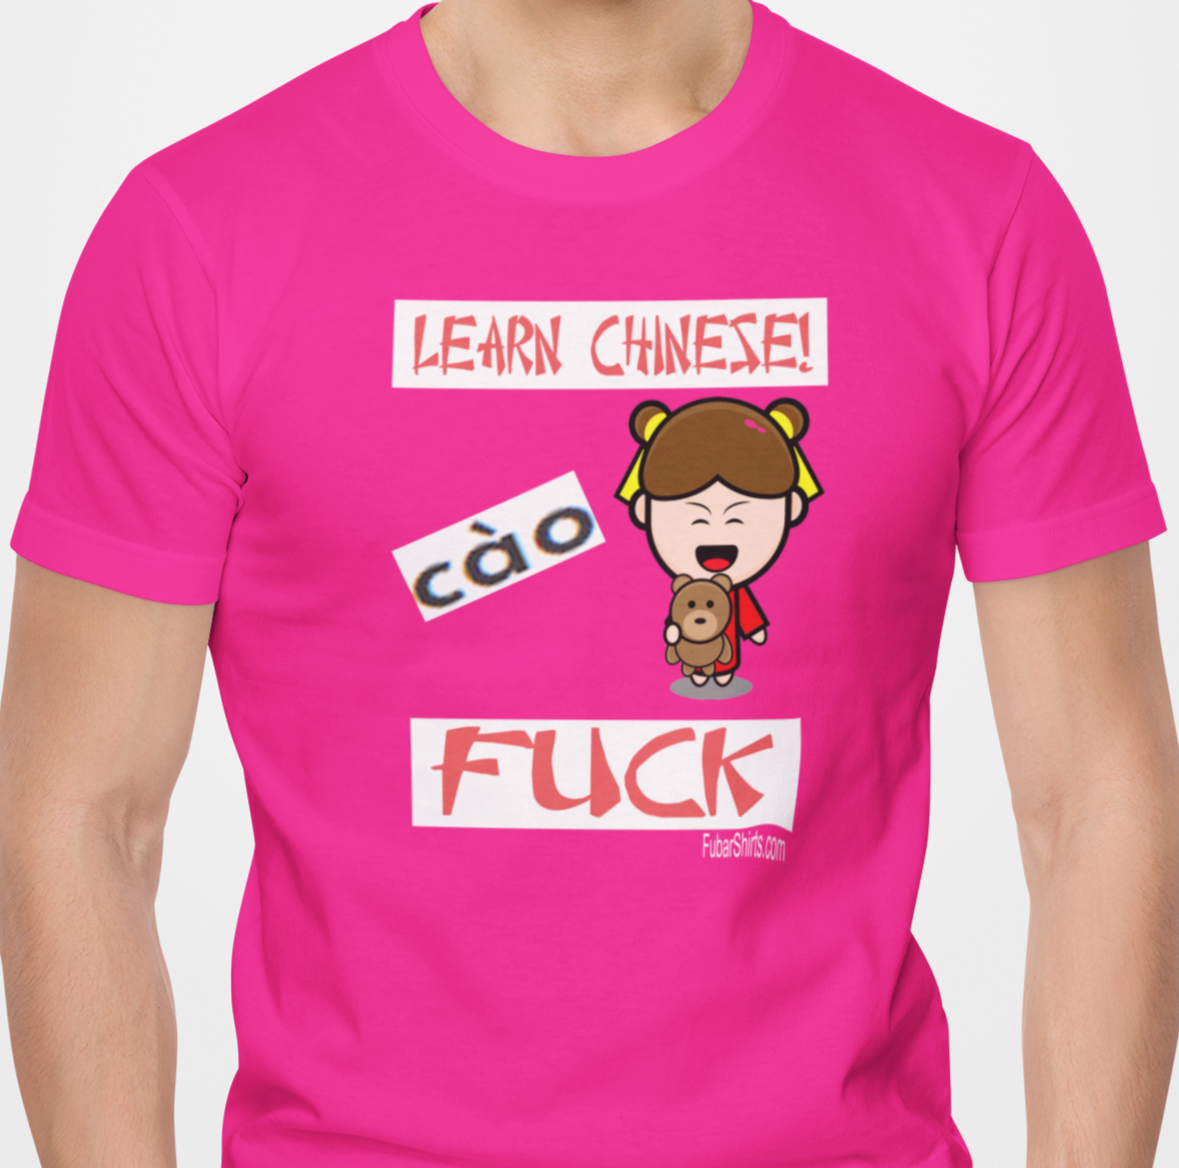 Learn chinese say fuck t-shirt by fubarshirts.com. pink tee.